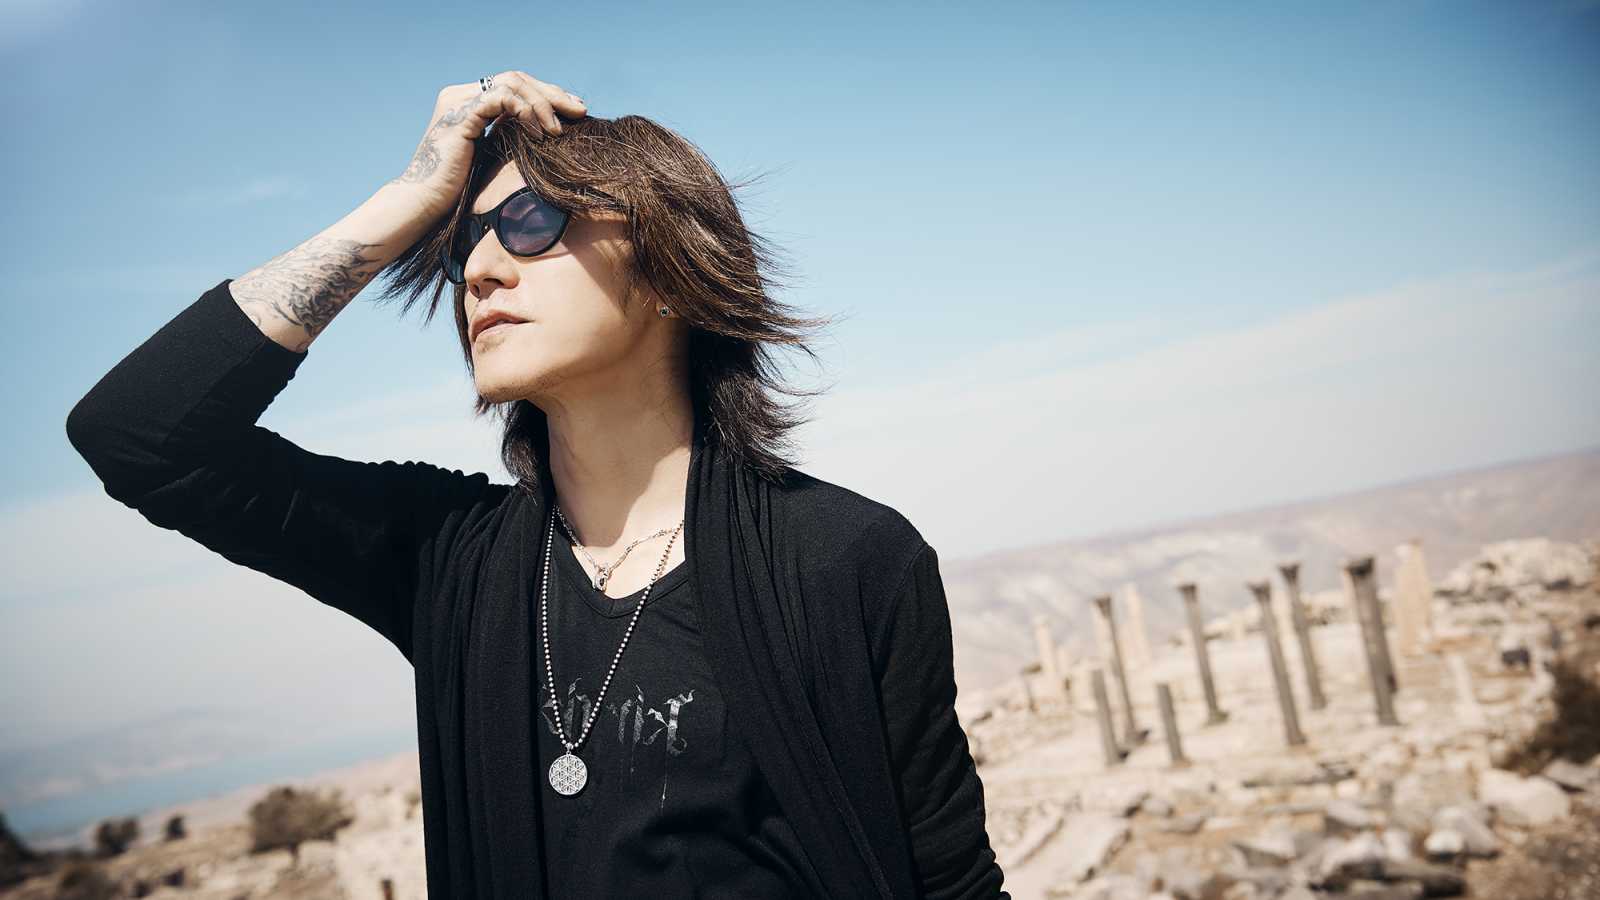 Interview with SUGIZO © SUGIZO. All rights reserved.